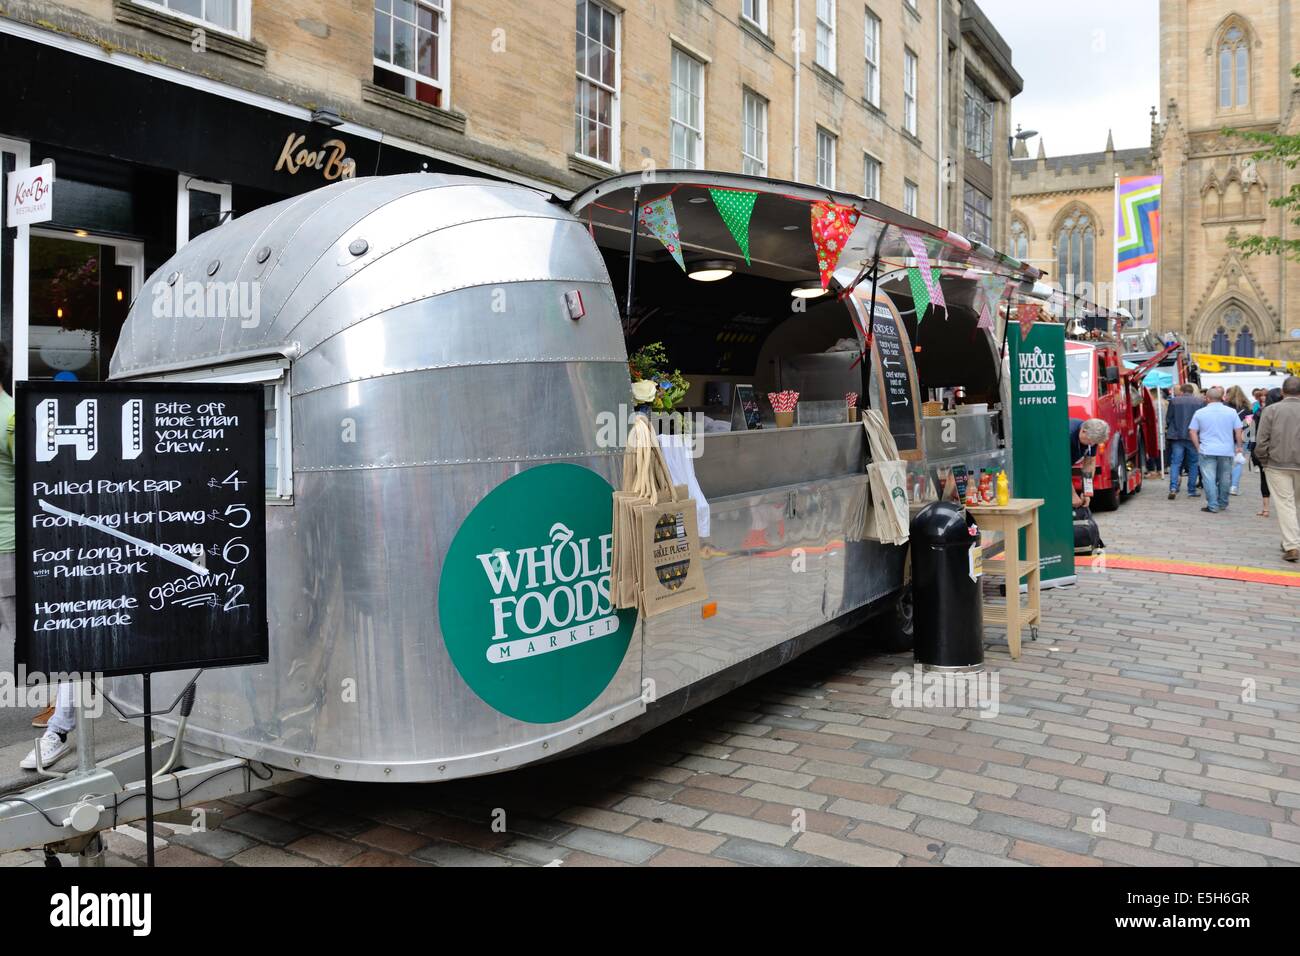 The mobile Whole Foods trailer at the Merchant city festival in Glasgow city centre, Scotland Stock Photo